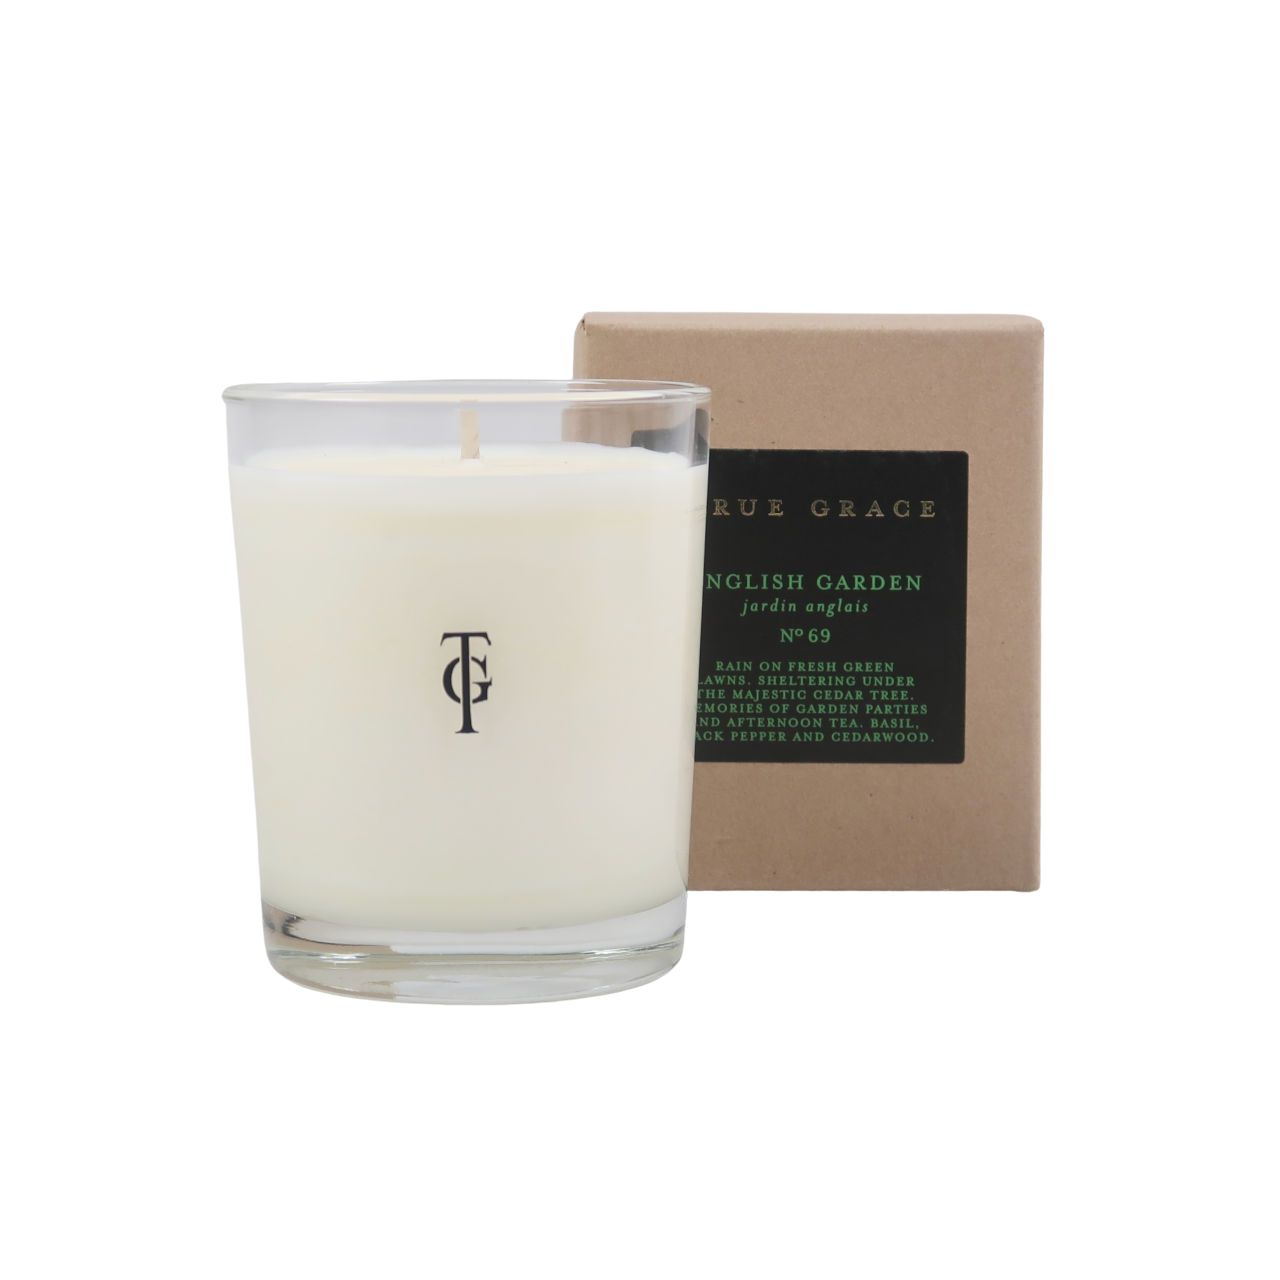 True Grace English Garden Scented Candle by True Grace